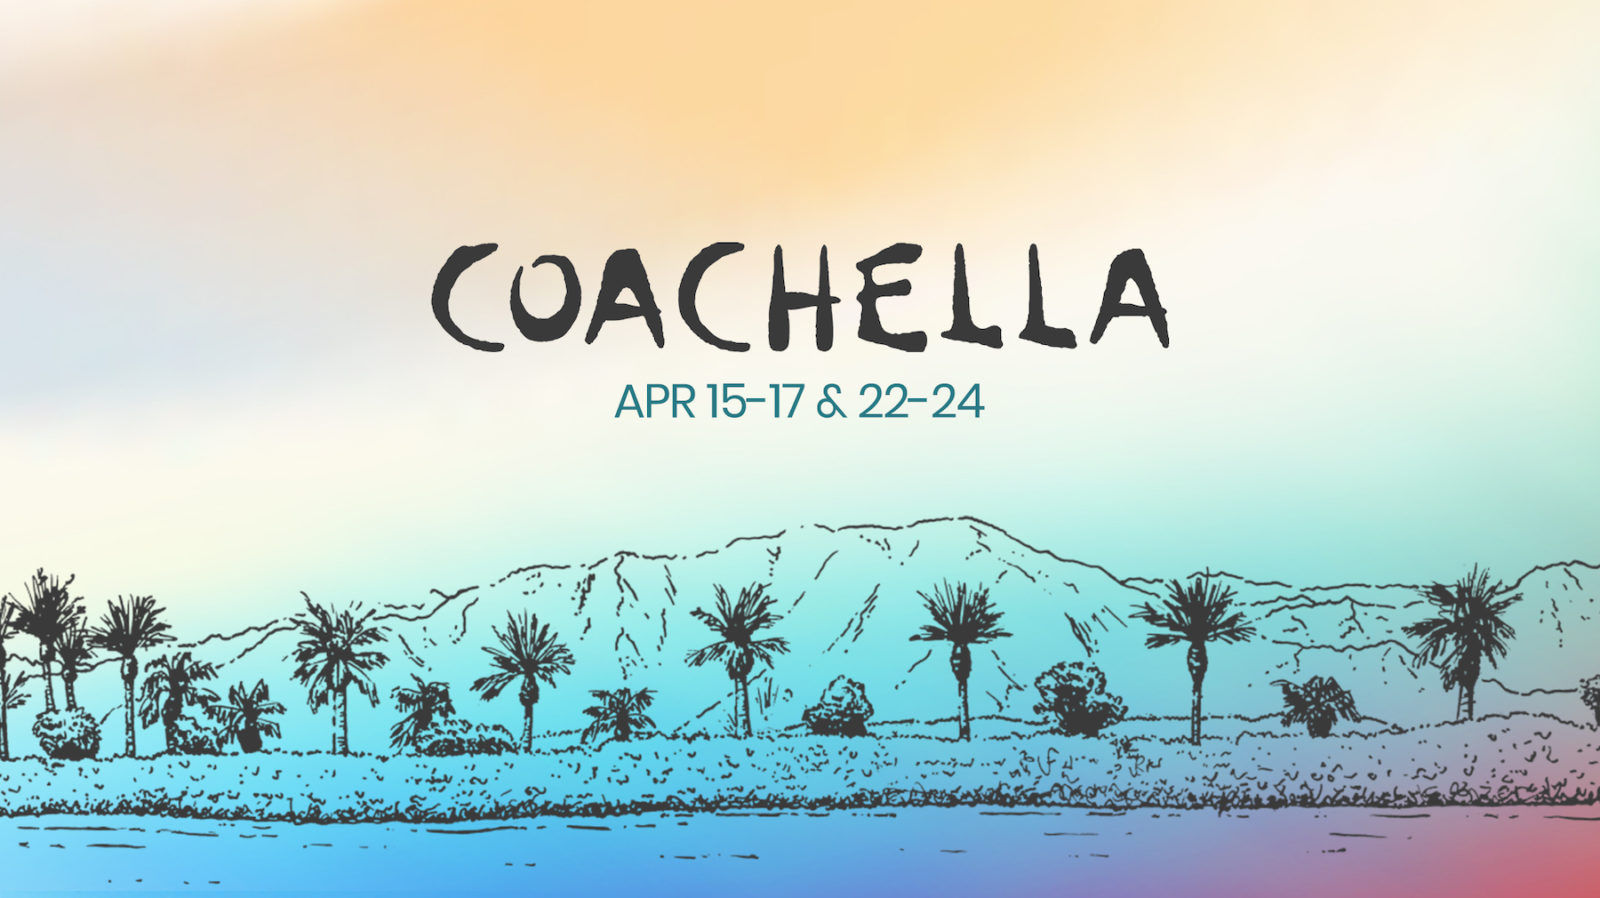 How to Watch and Experience the Best of Coachella 2022 Online